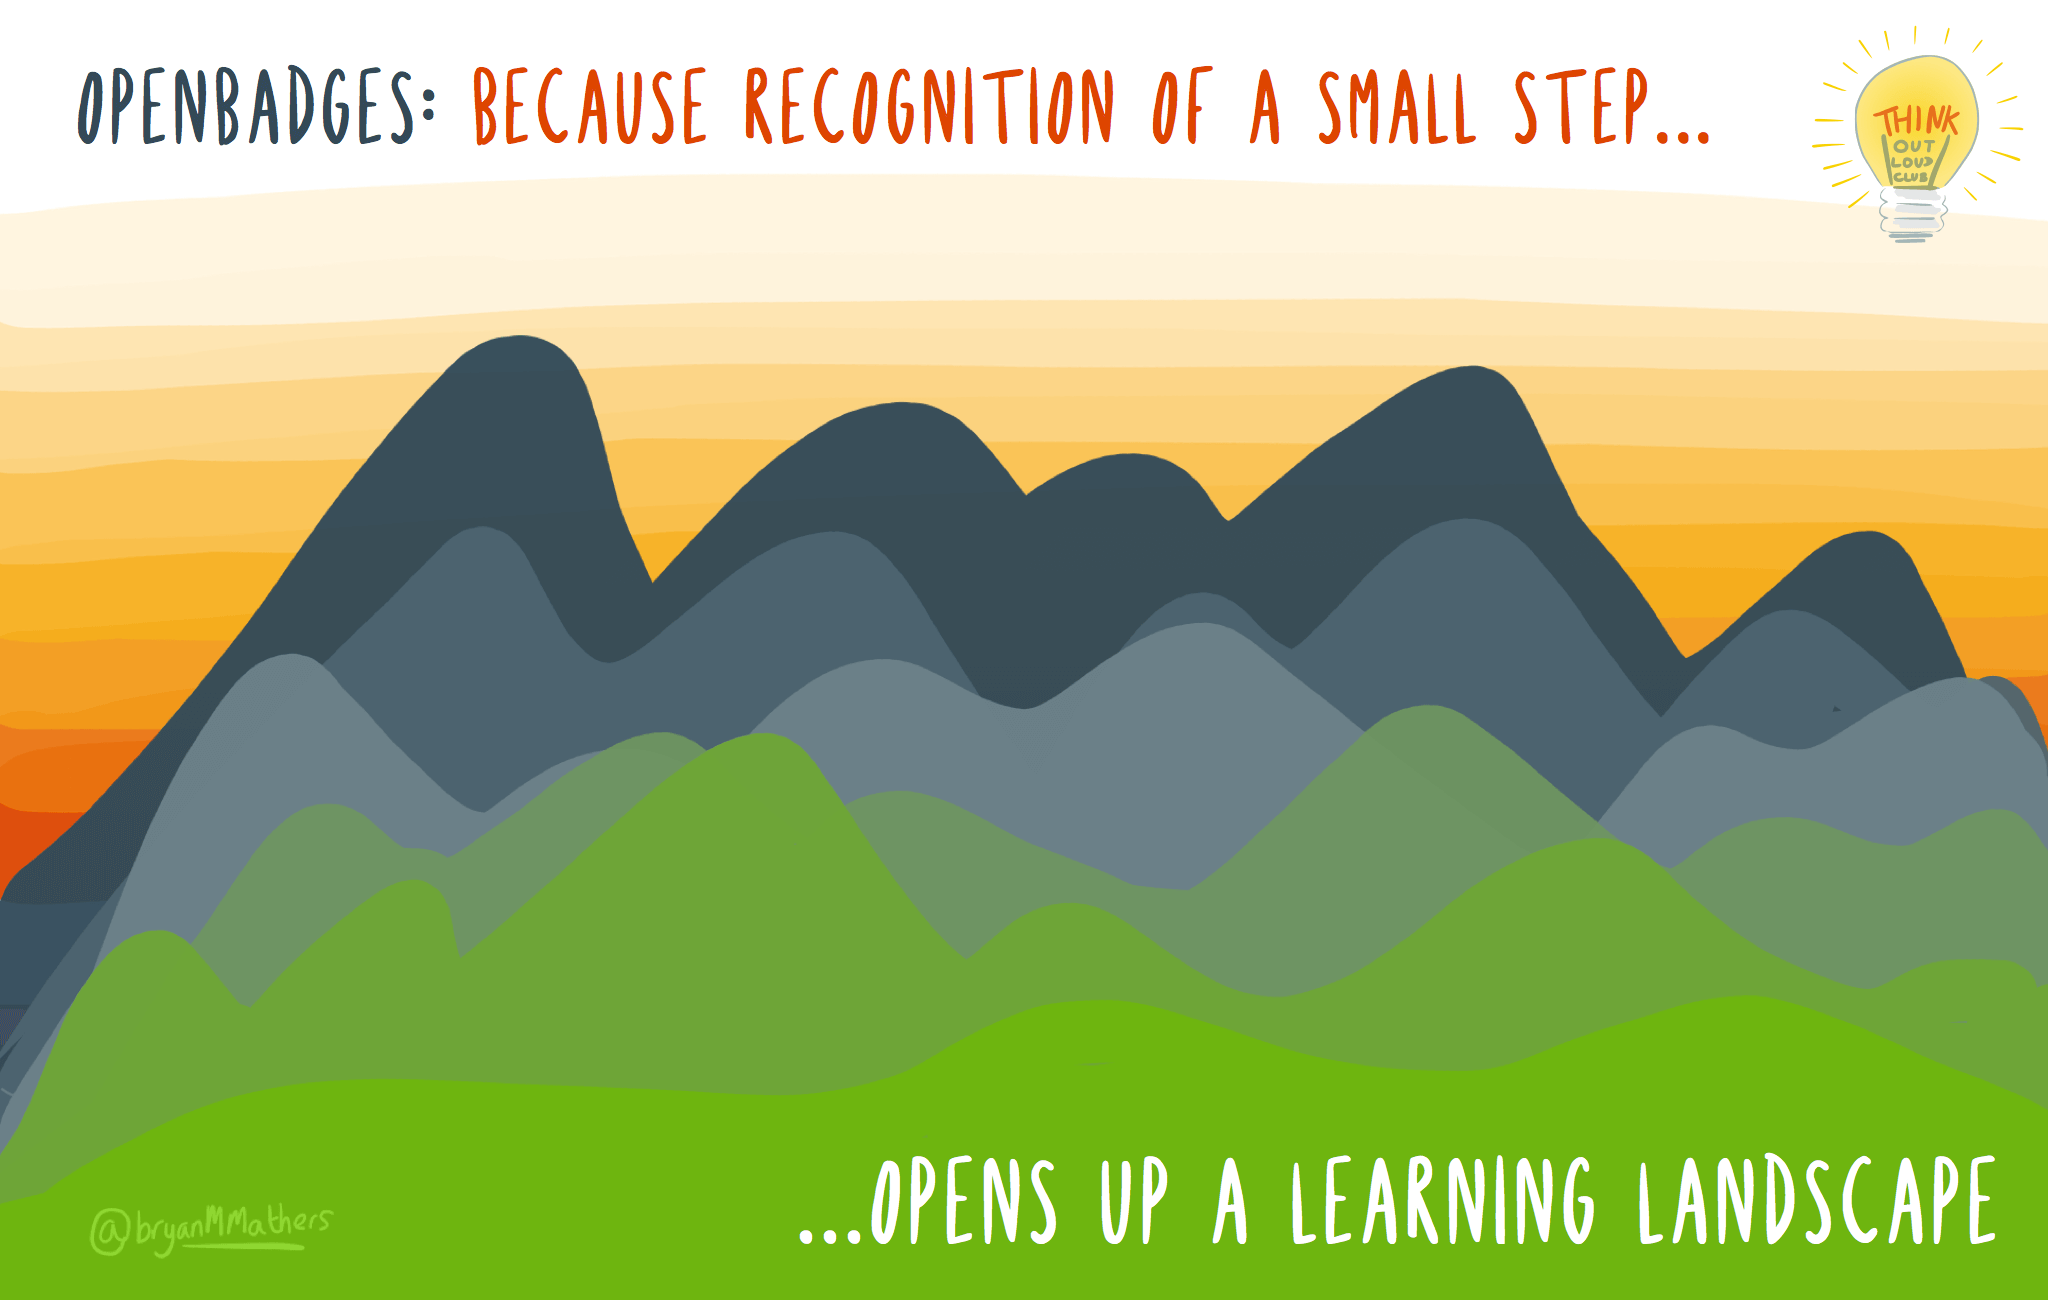 Recognition of a small step